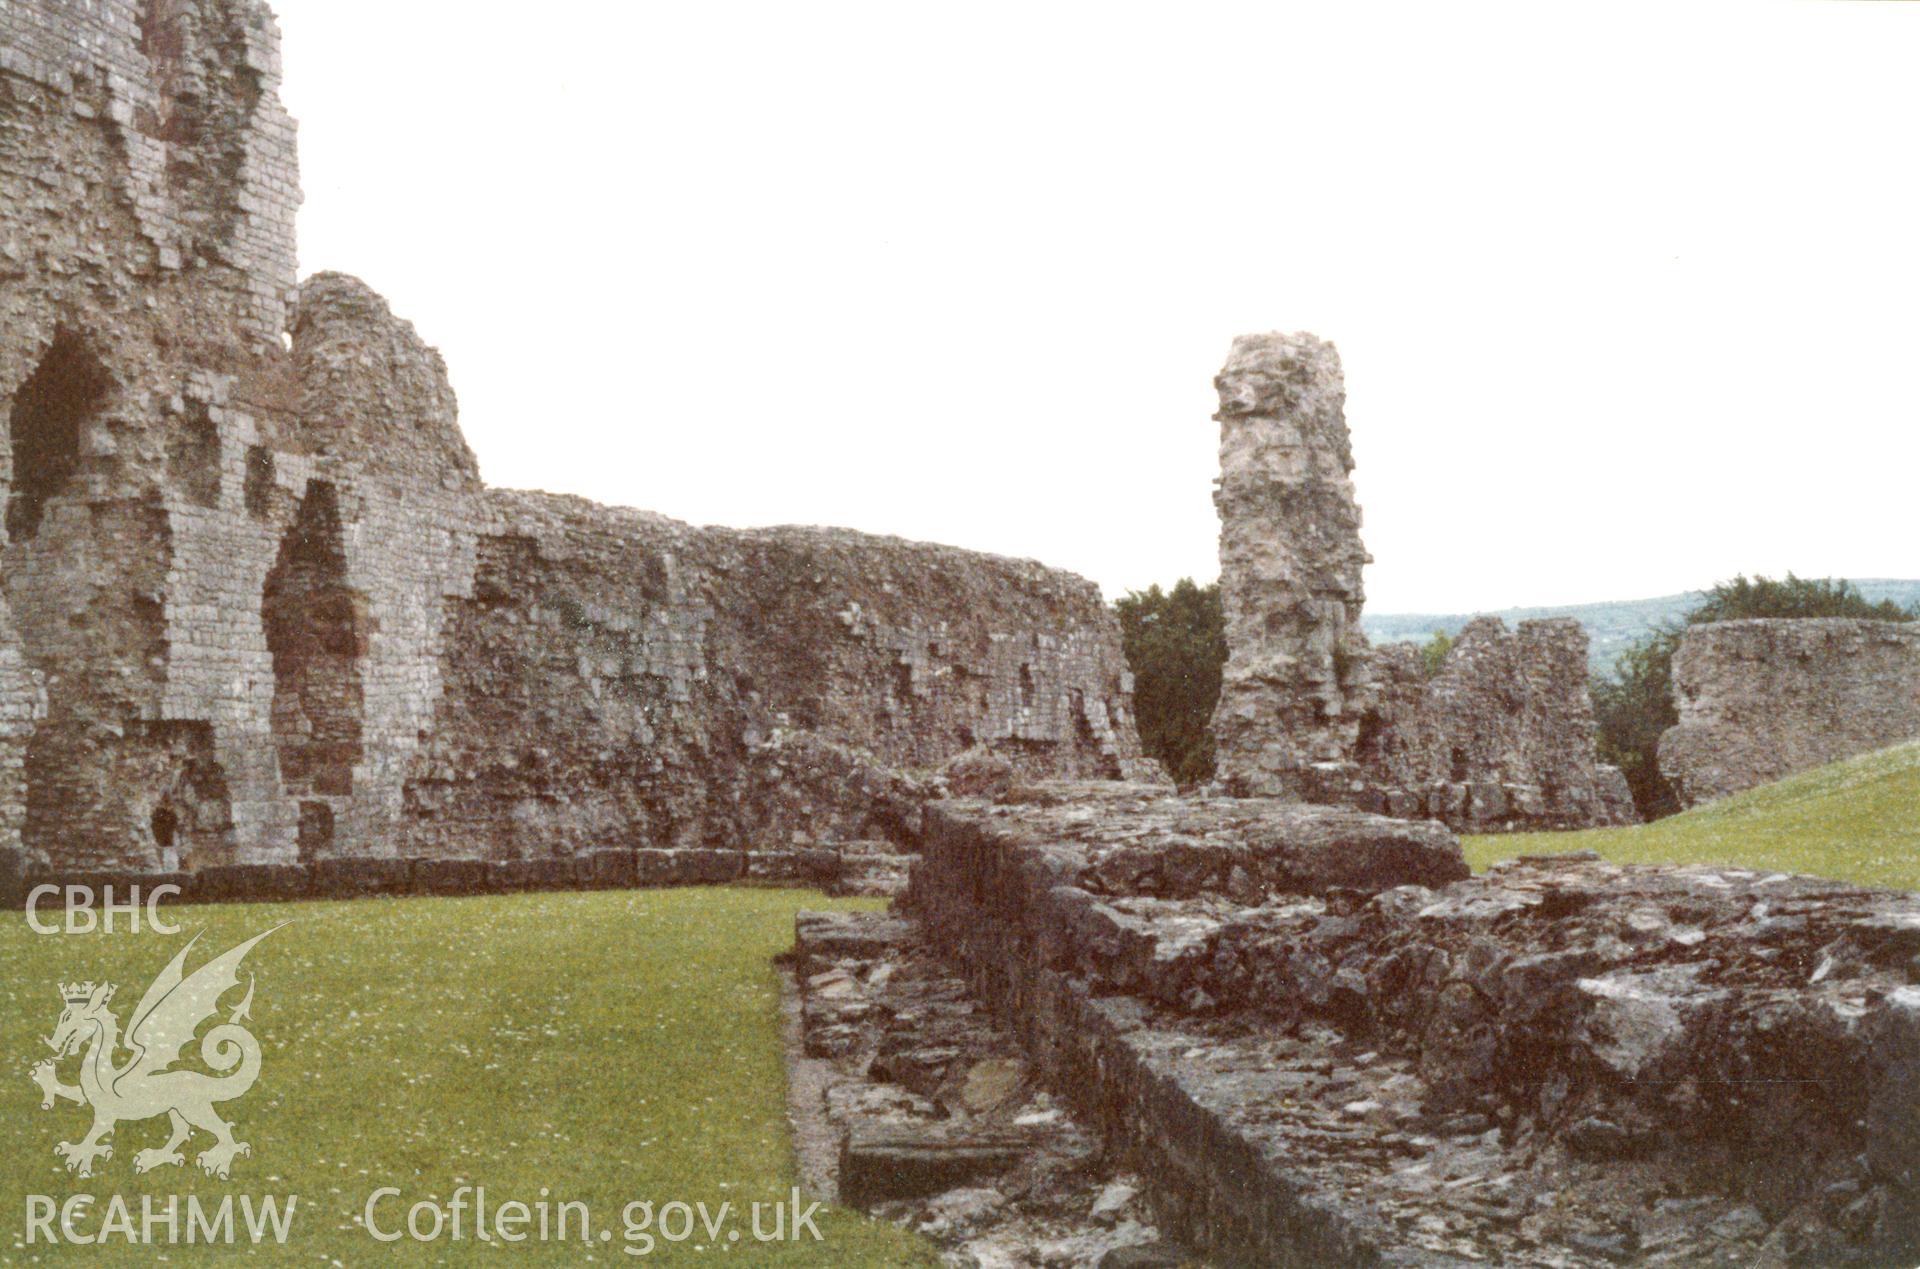 1 of a set of 8 colour prints showing views of Denbigh castle, collated by the former Central Office of Information.